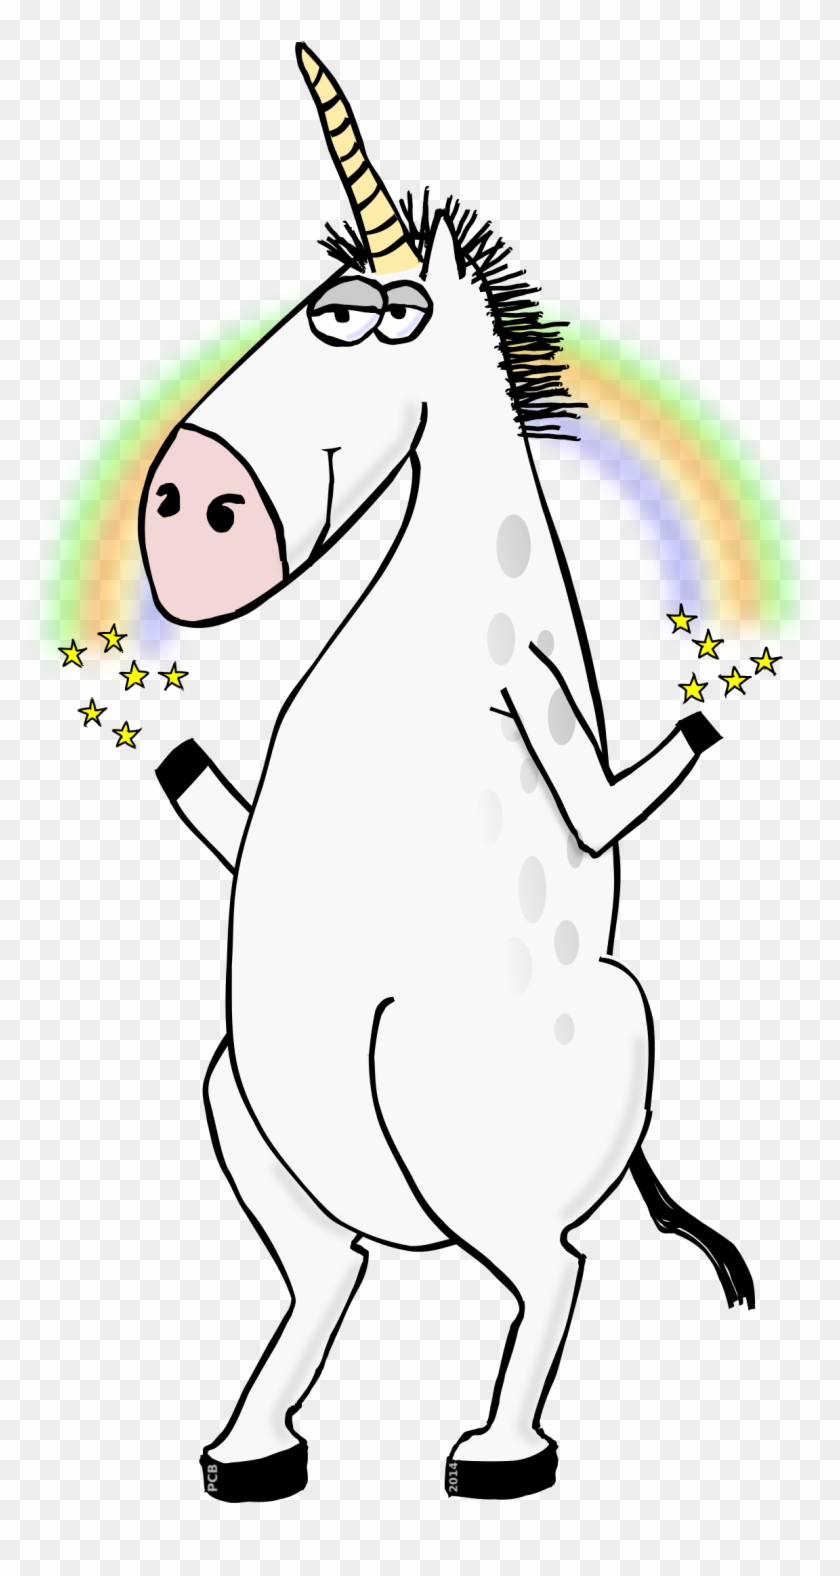 This Free Icons Png Design Of Utopic Unicorn Clipart #1233837